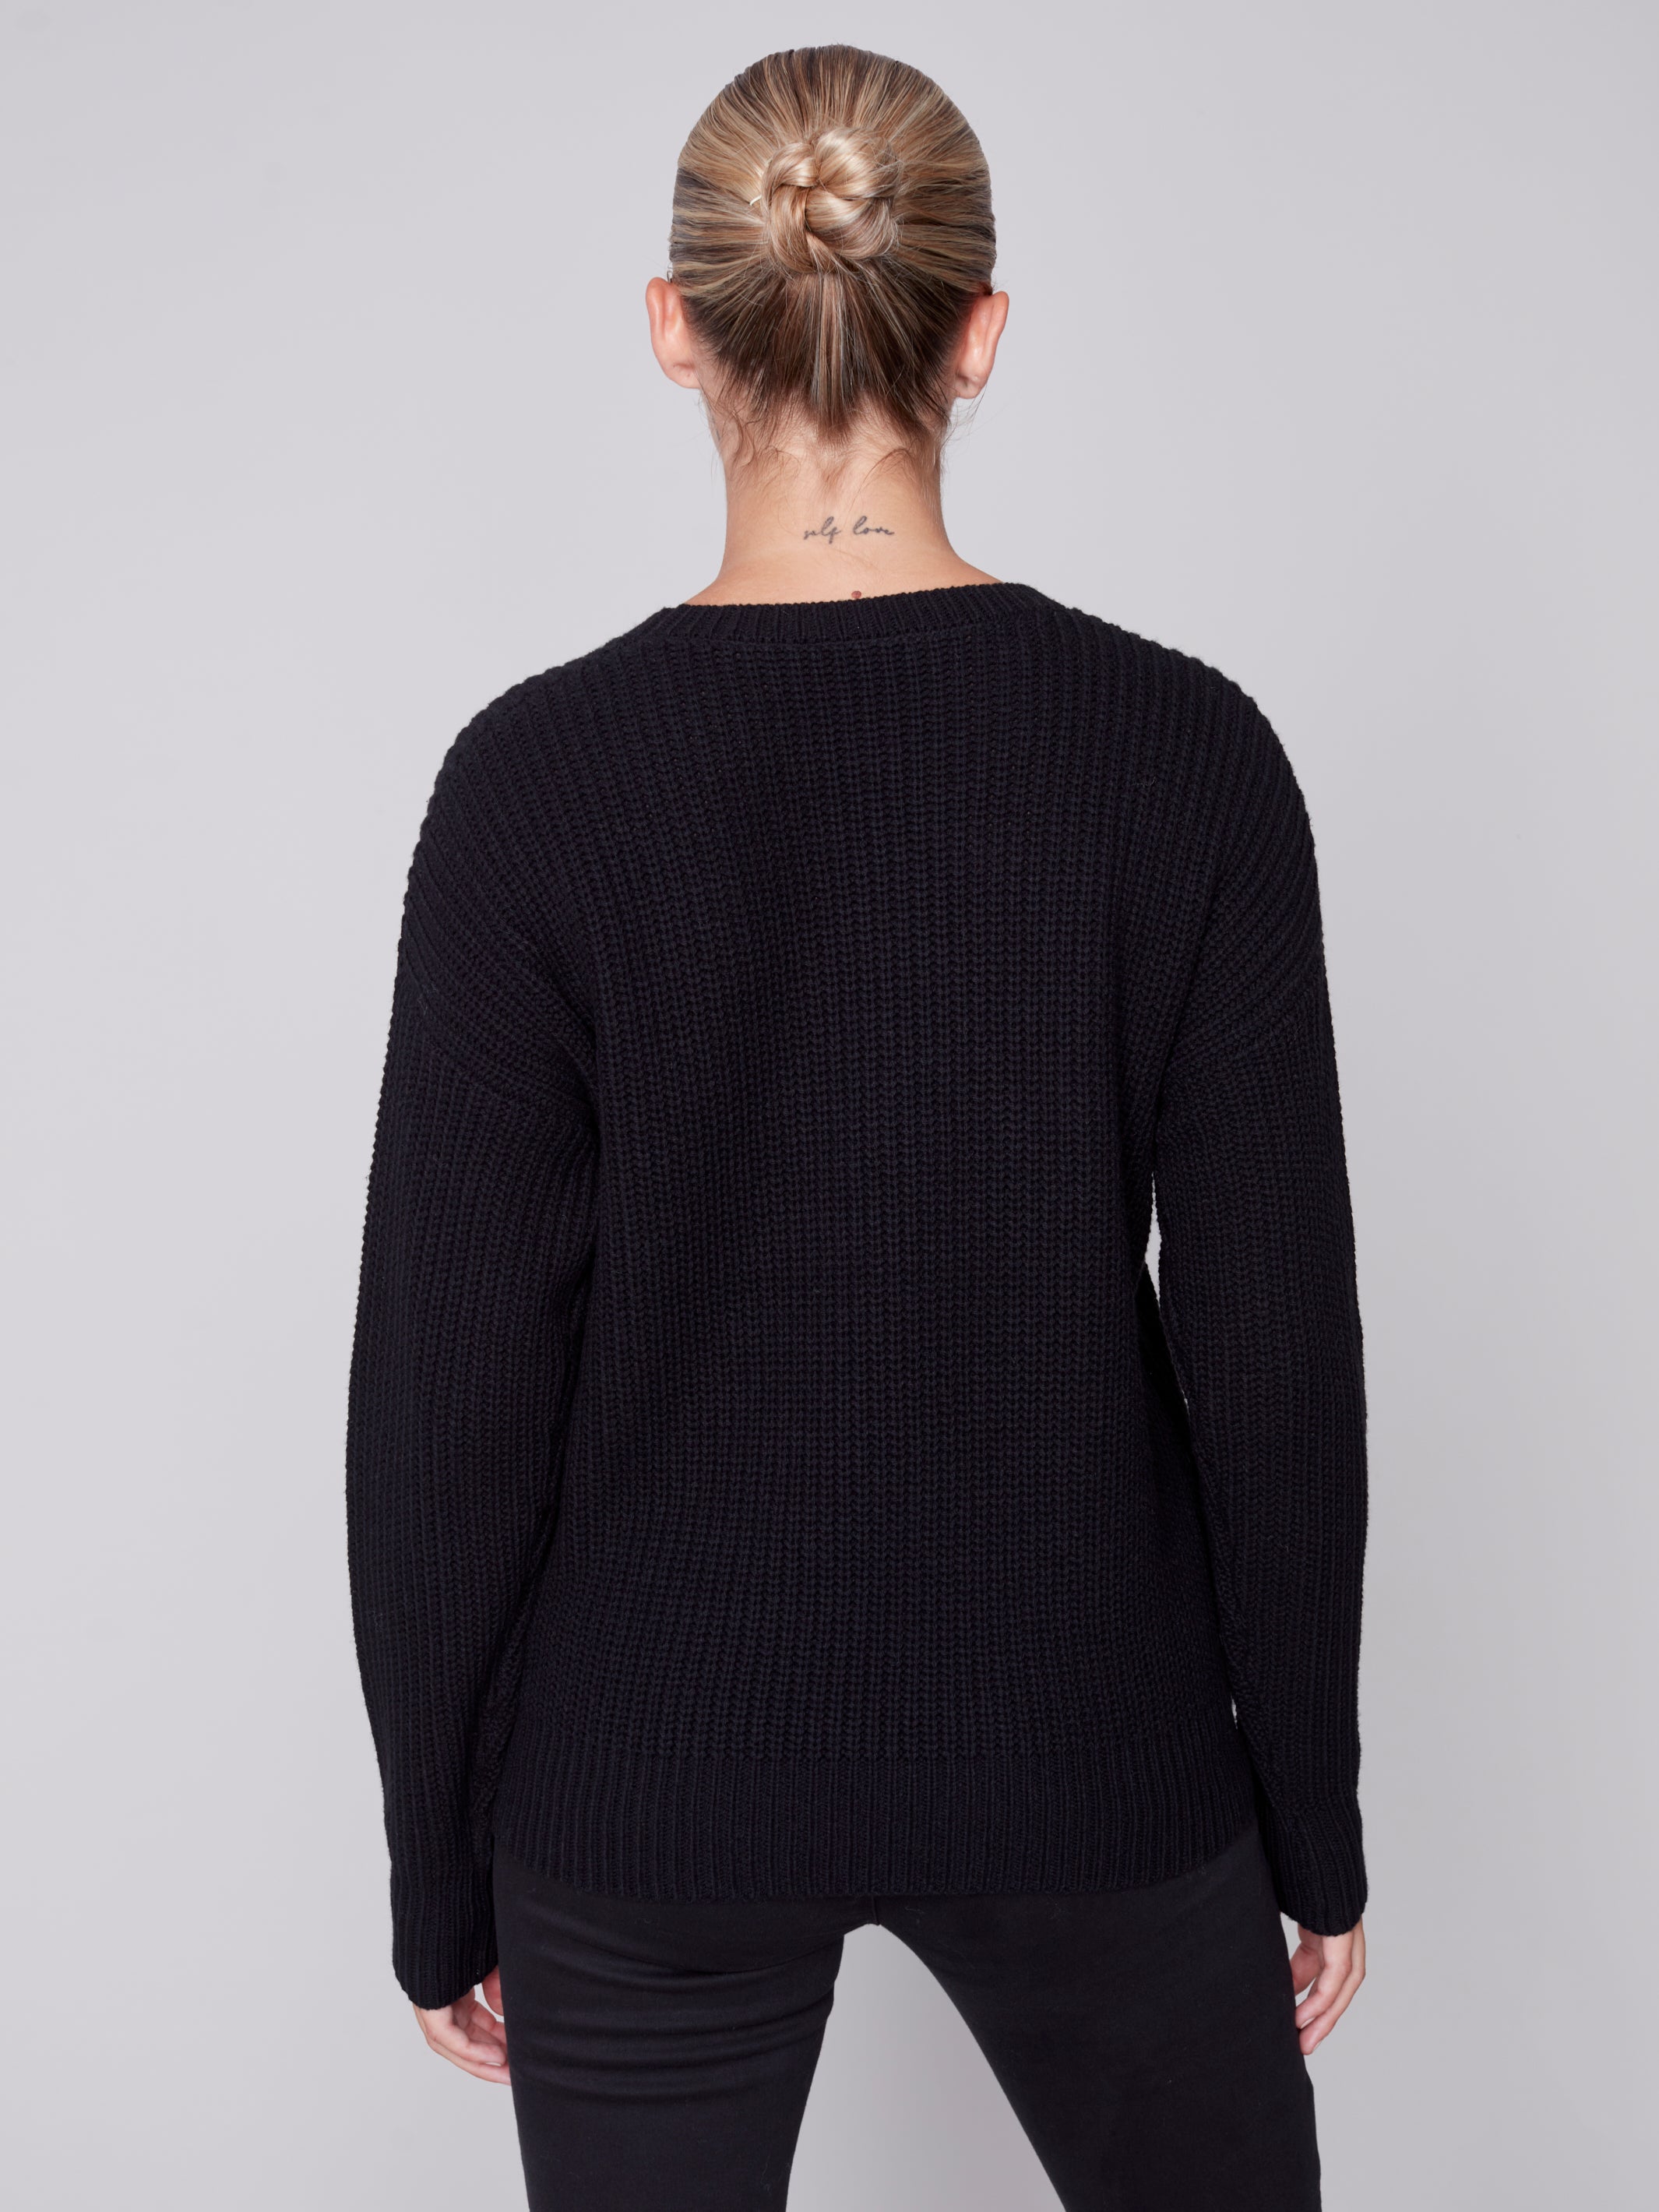 Crew-Neck And Drop-Shoulder Embroidered LOVE Sweater